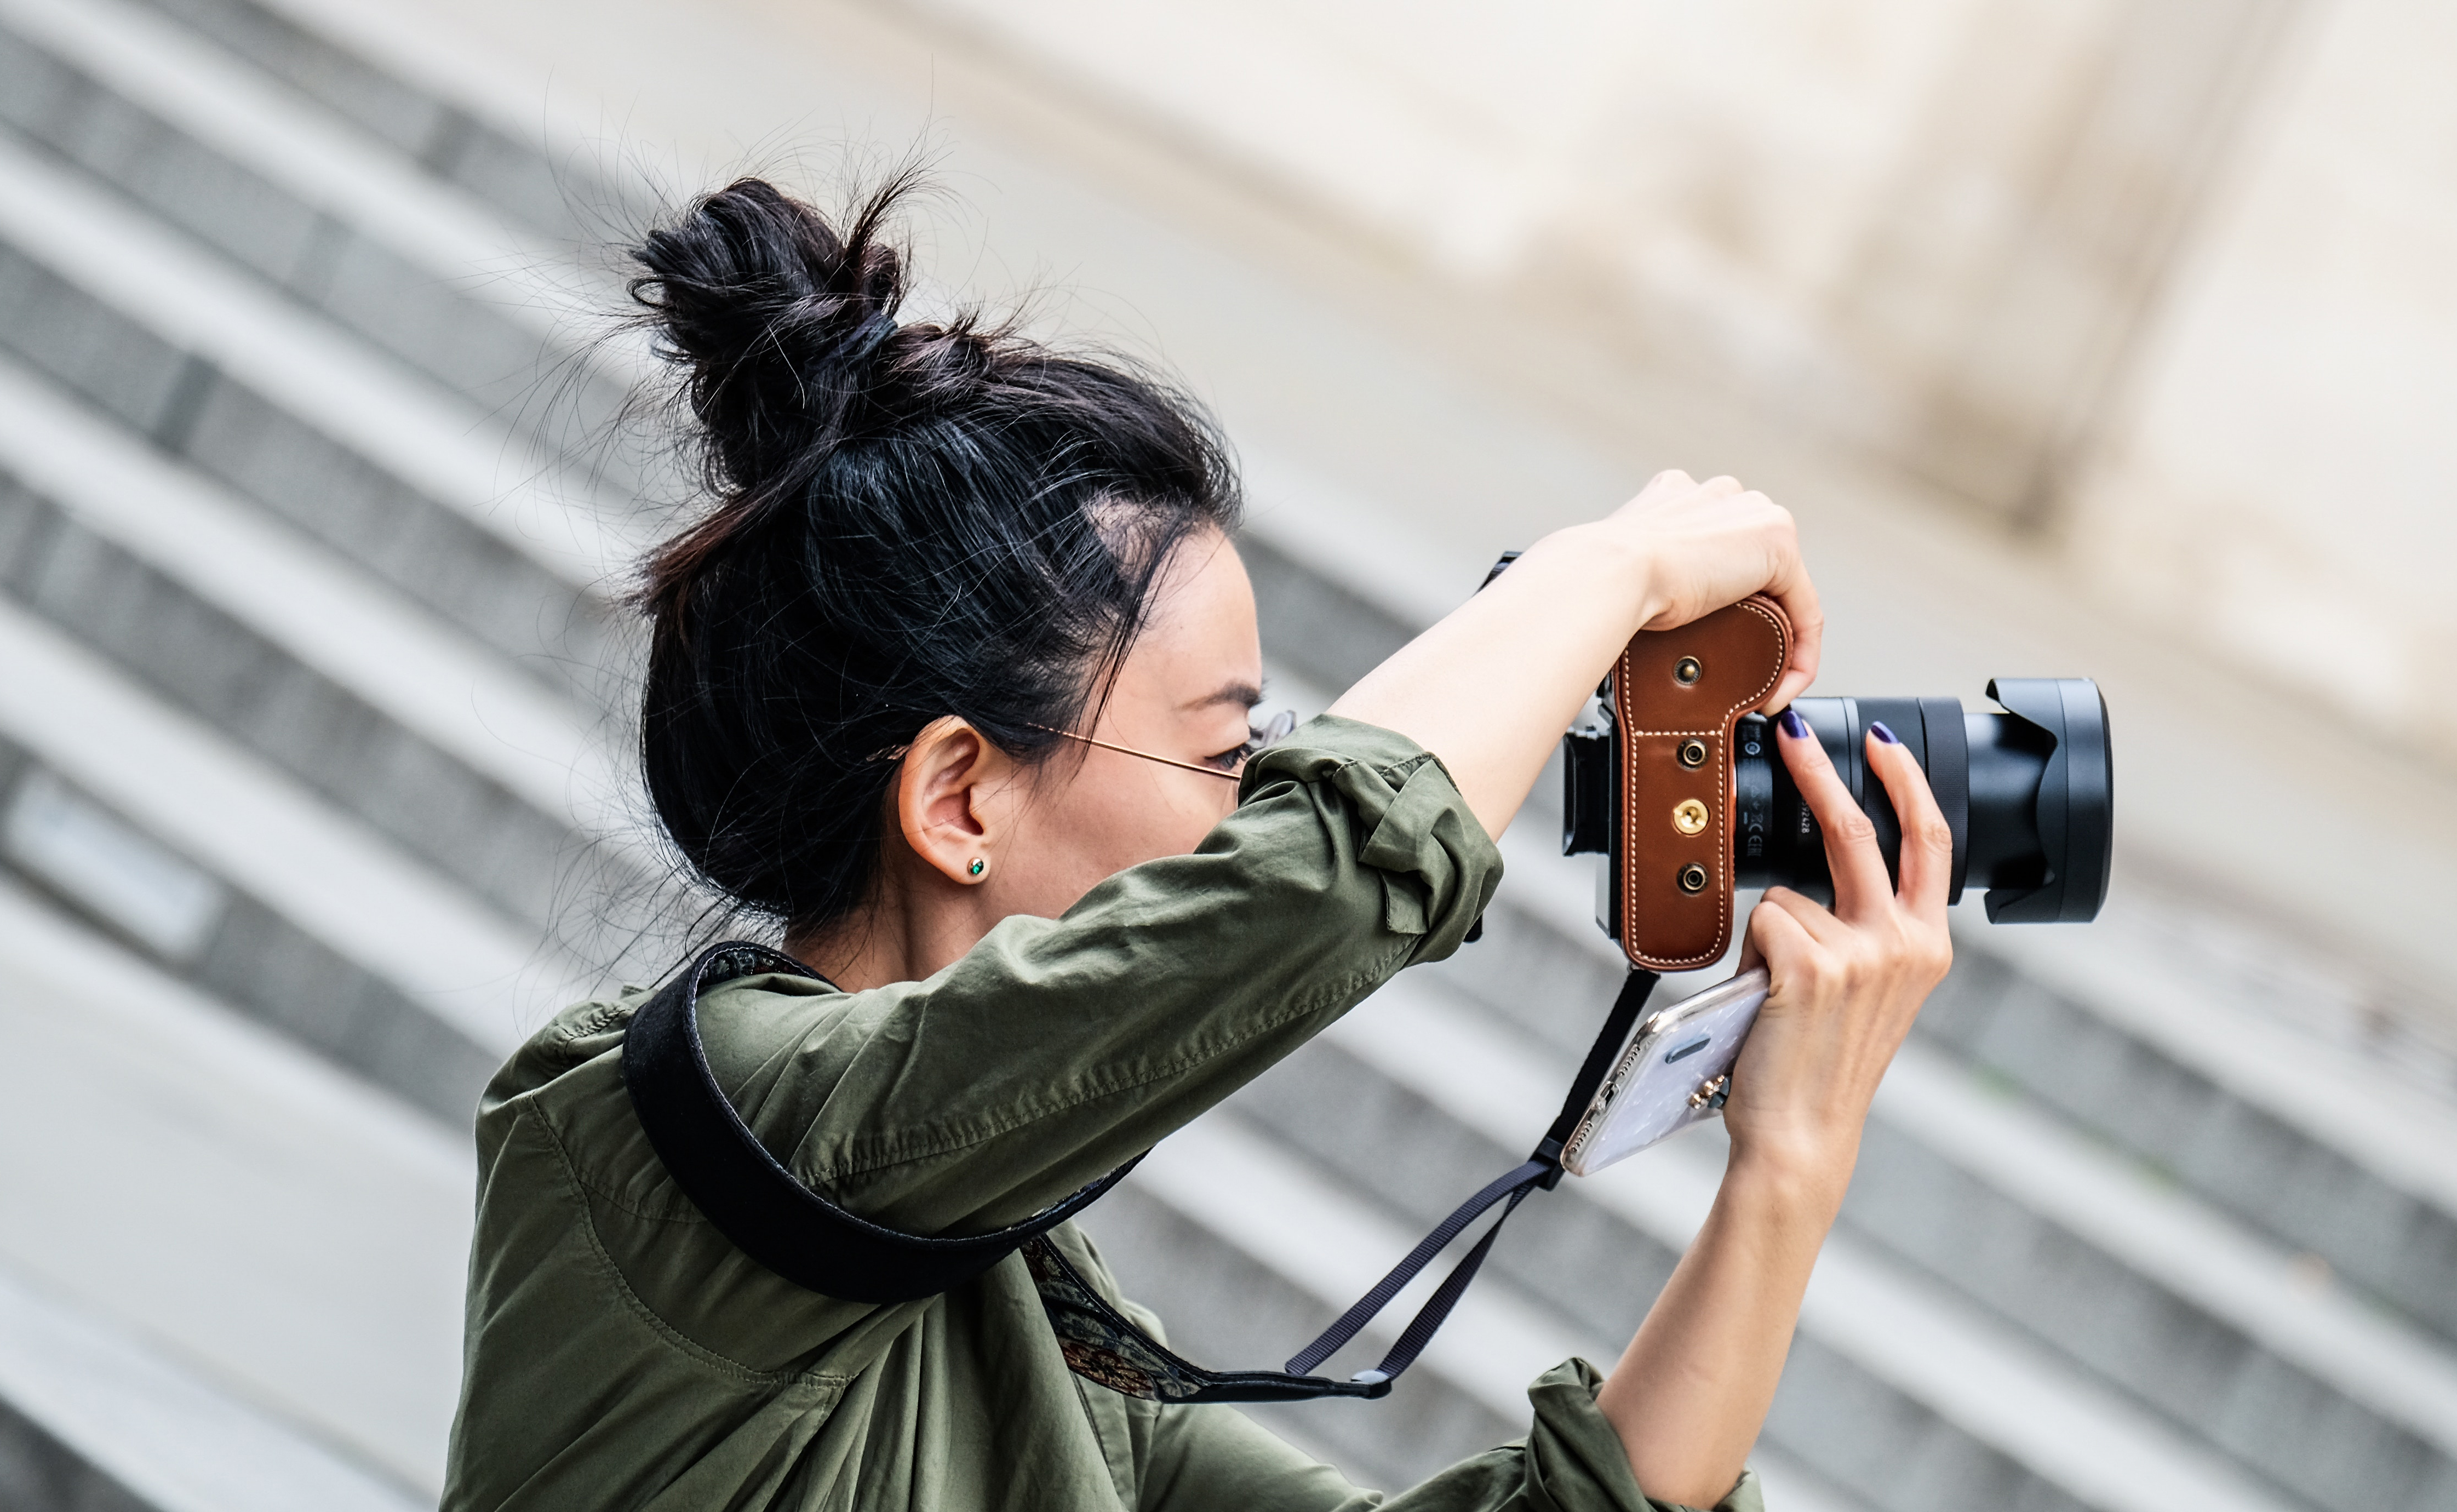 Woman outside with a camera taking photos